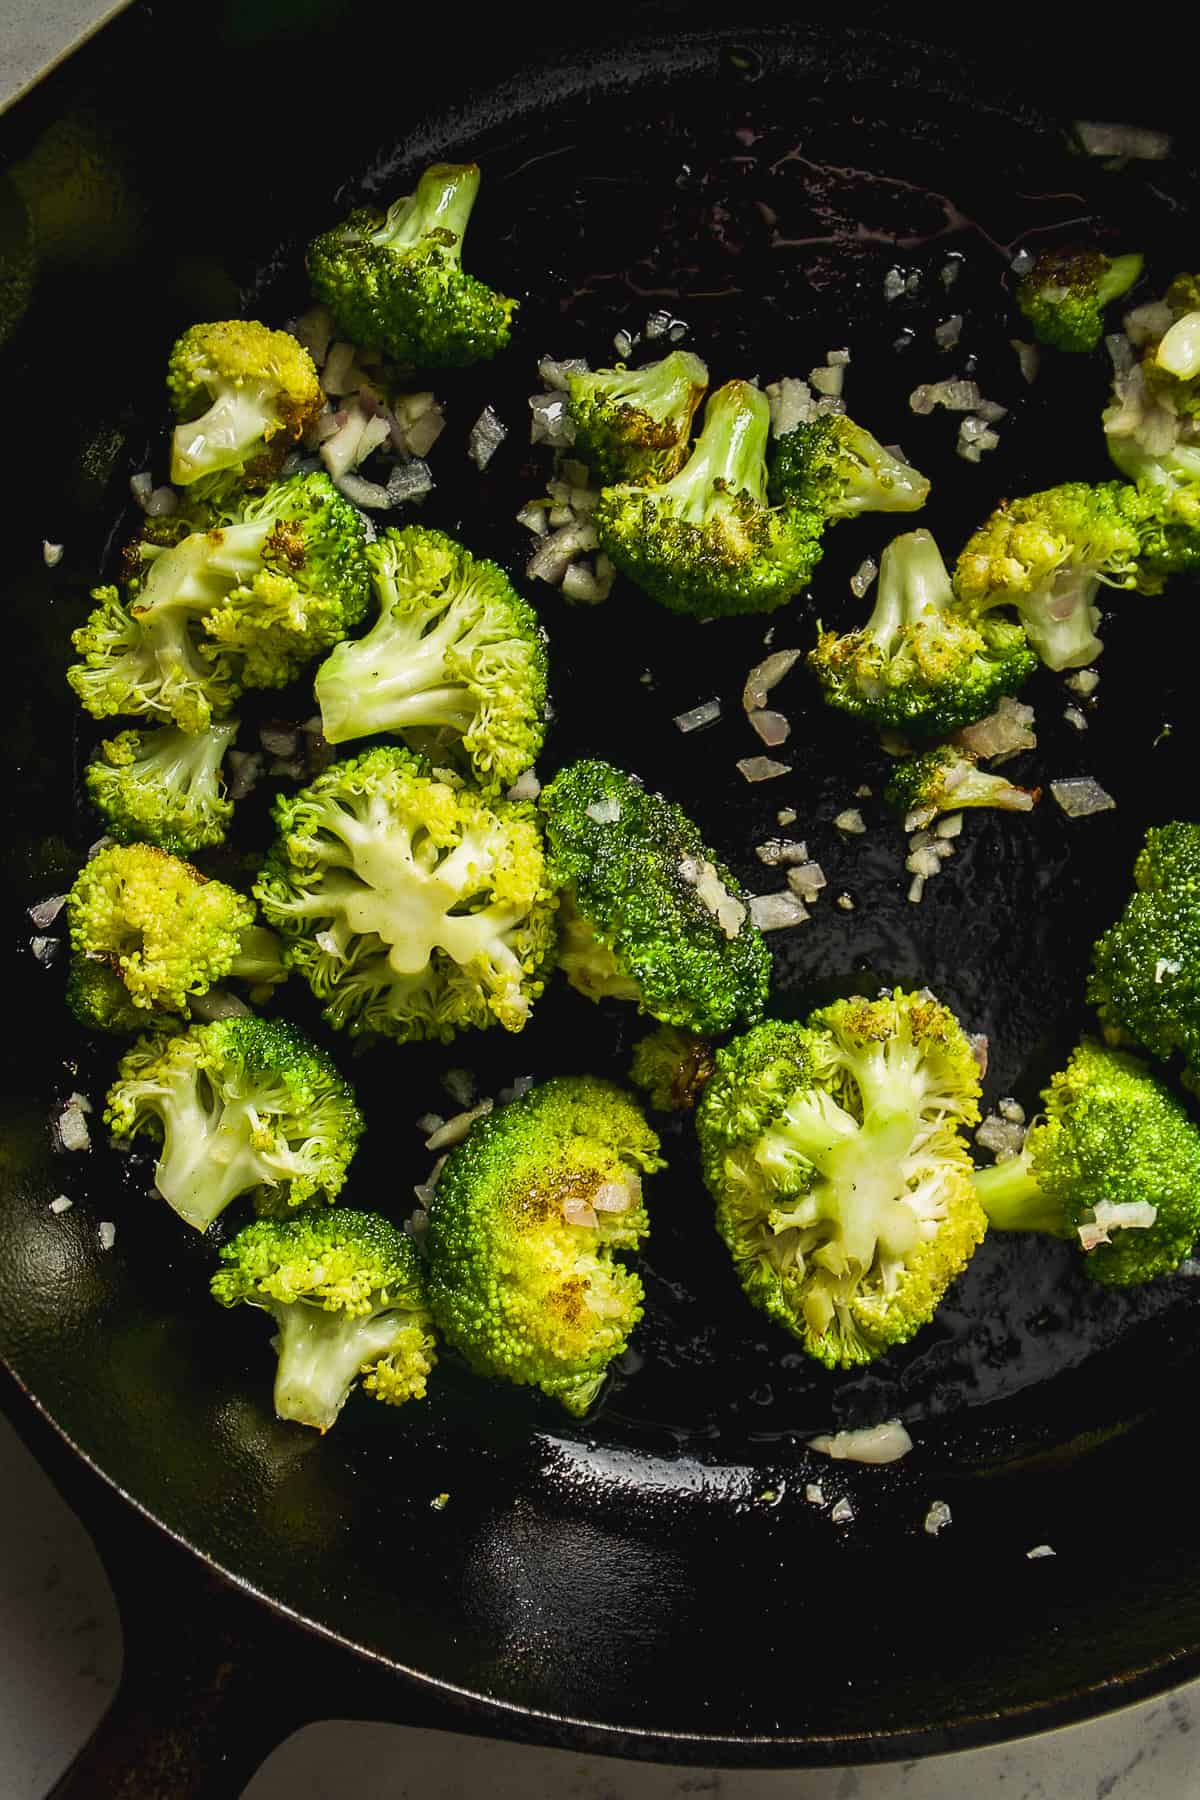 Broccoli cooking in a cast iron skillet.